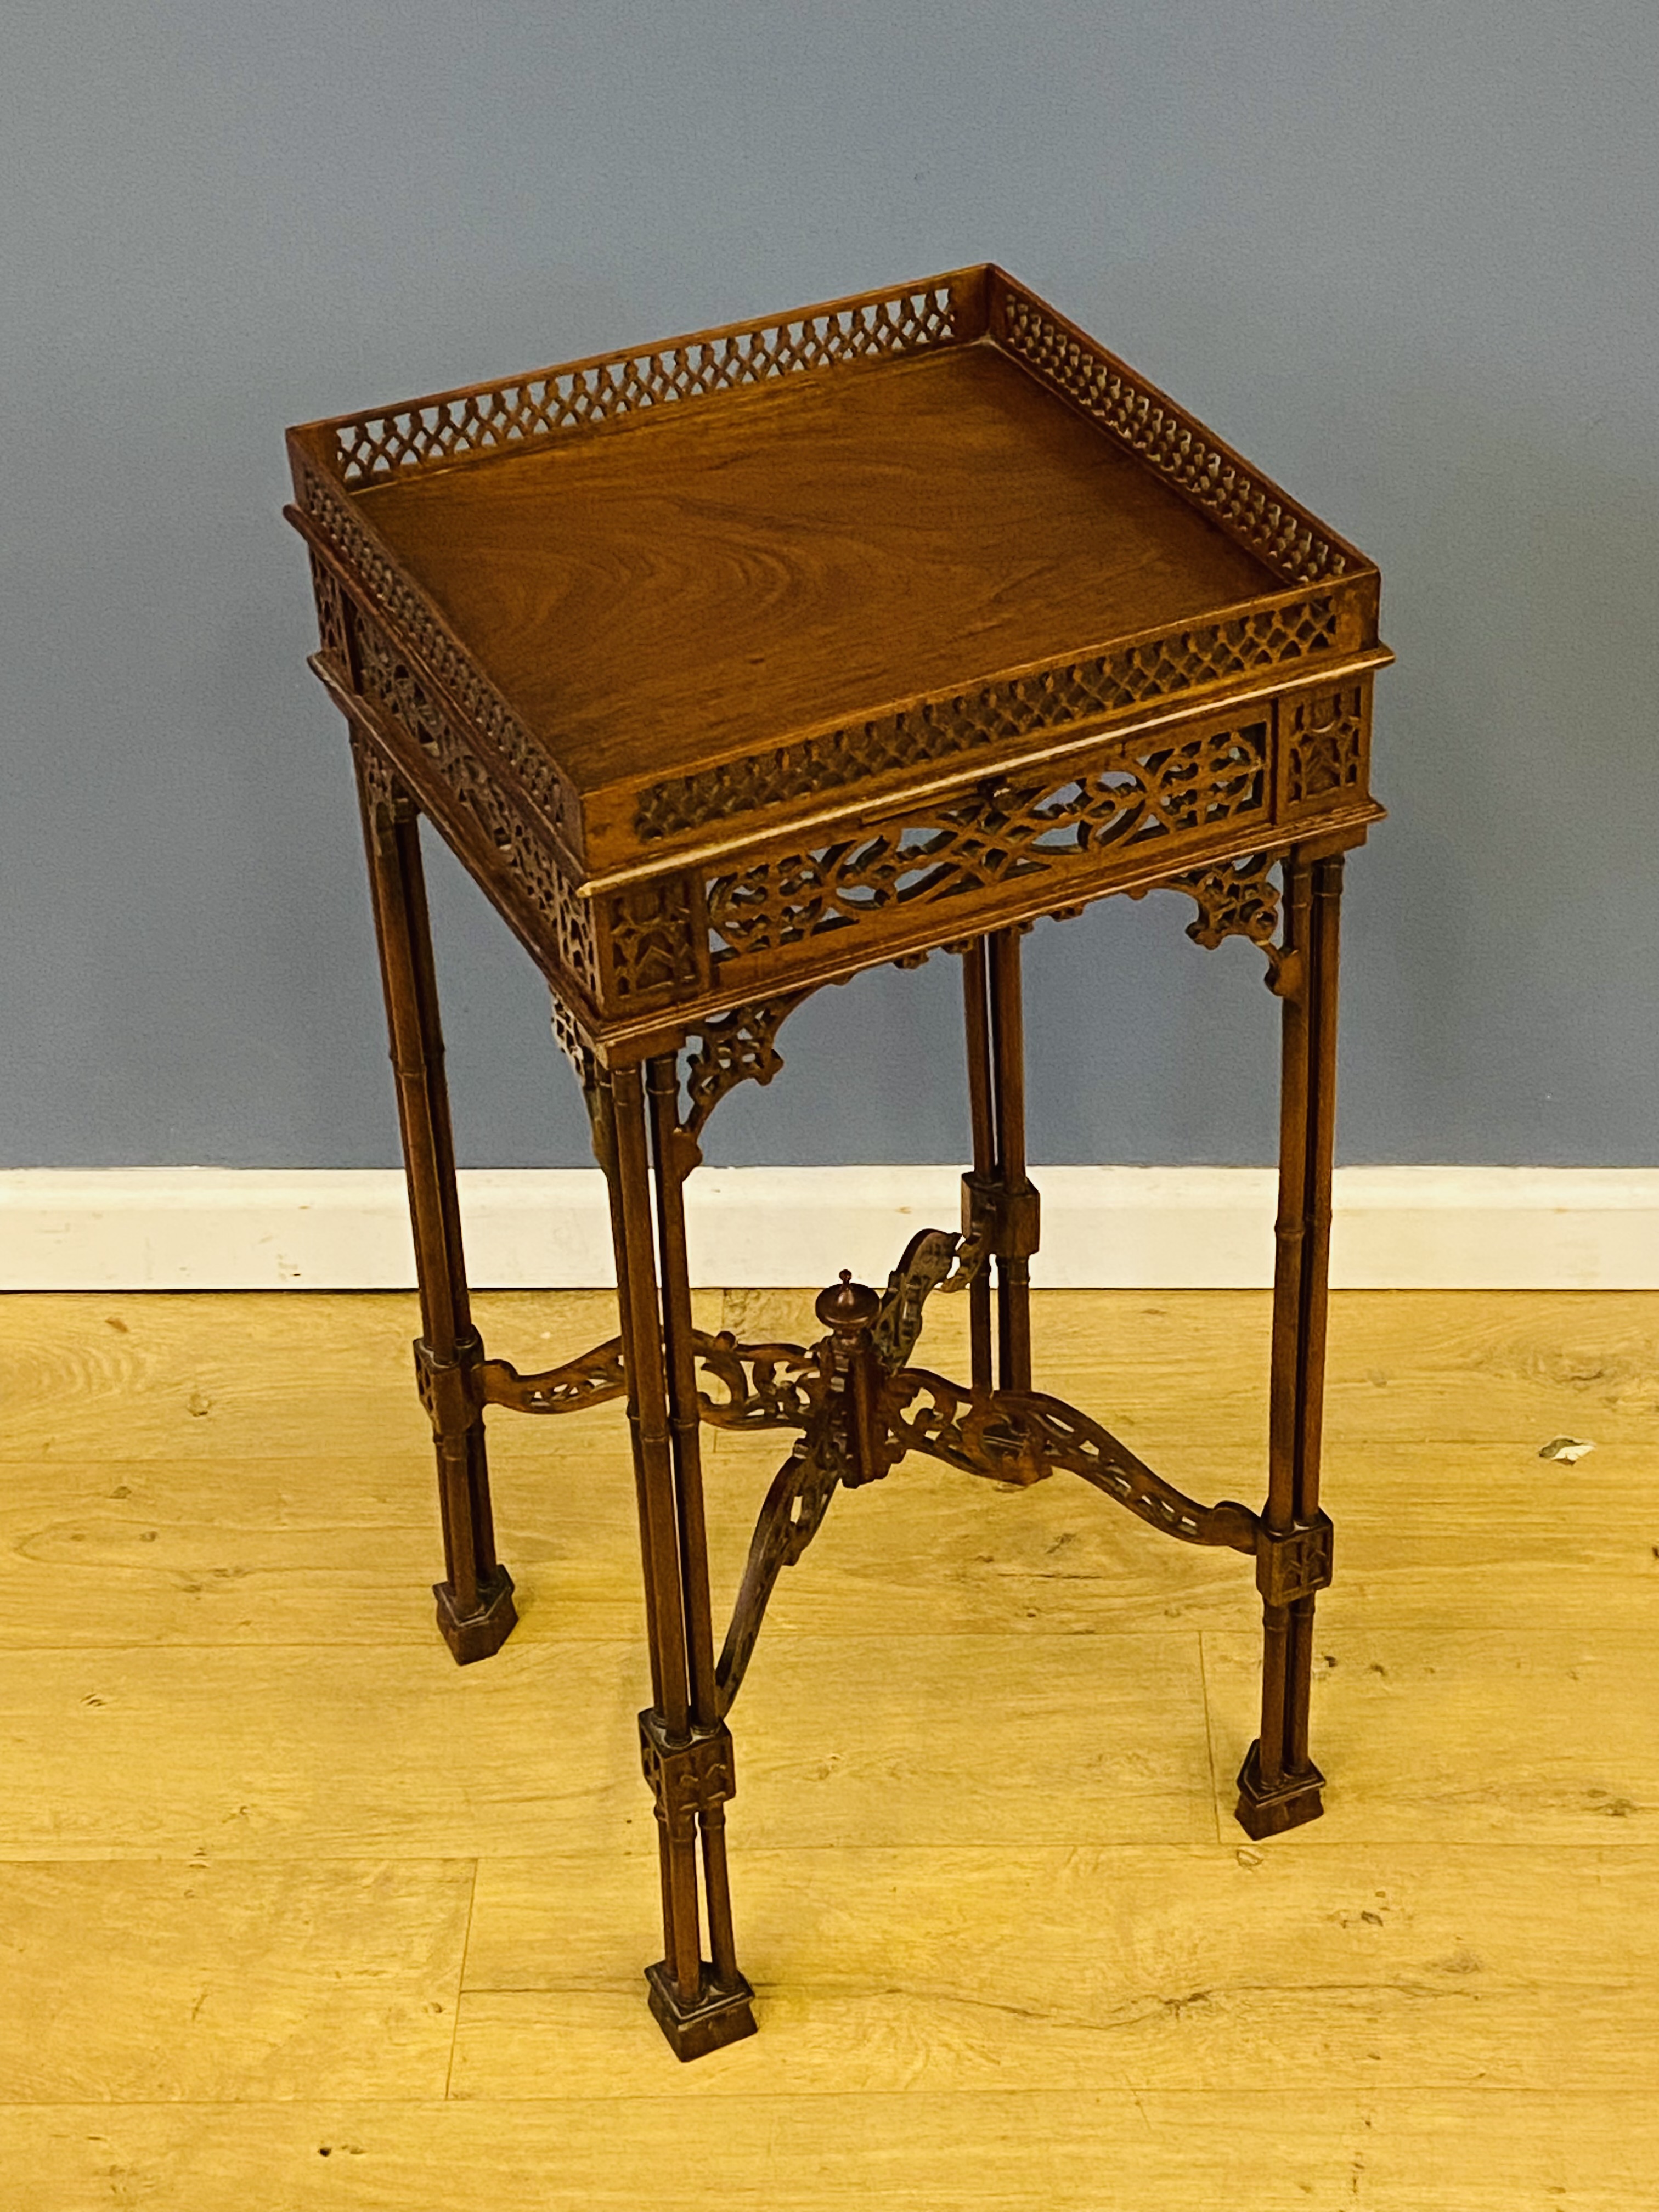 Reproduction Chippendale style mahogany urn stand - Image 3 of 6